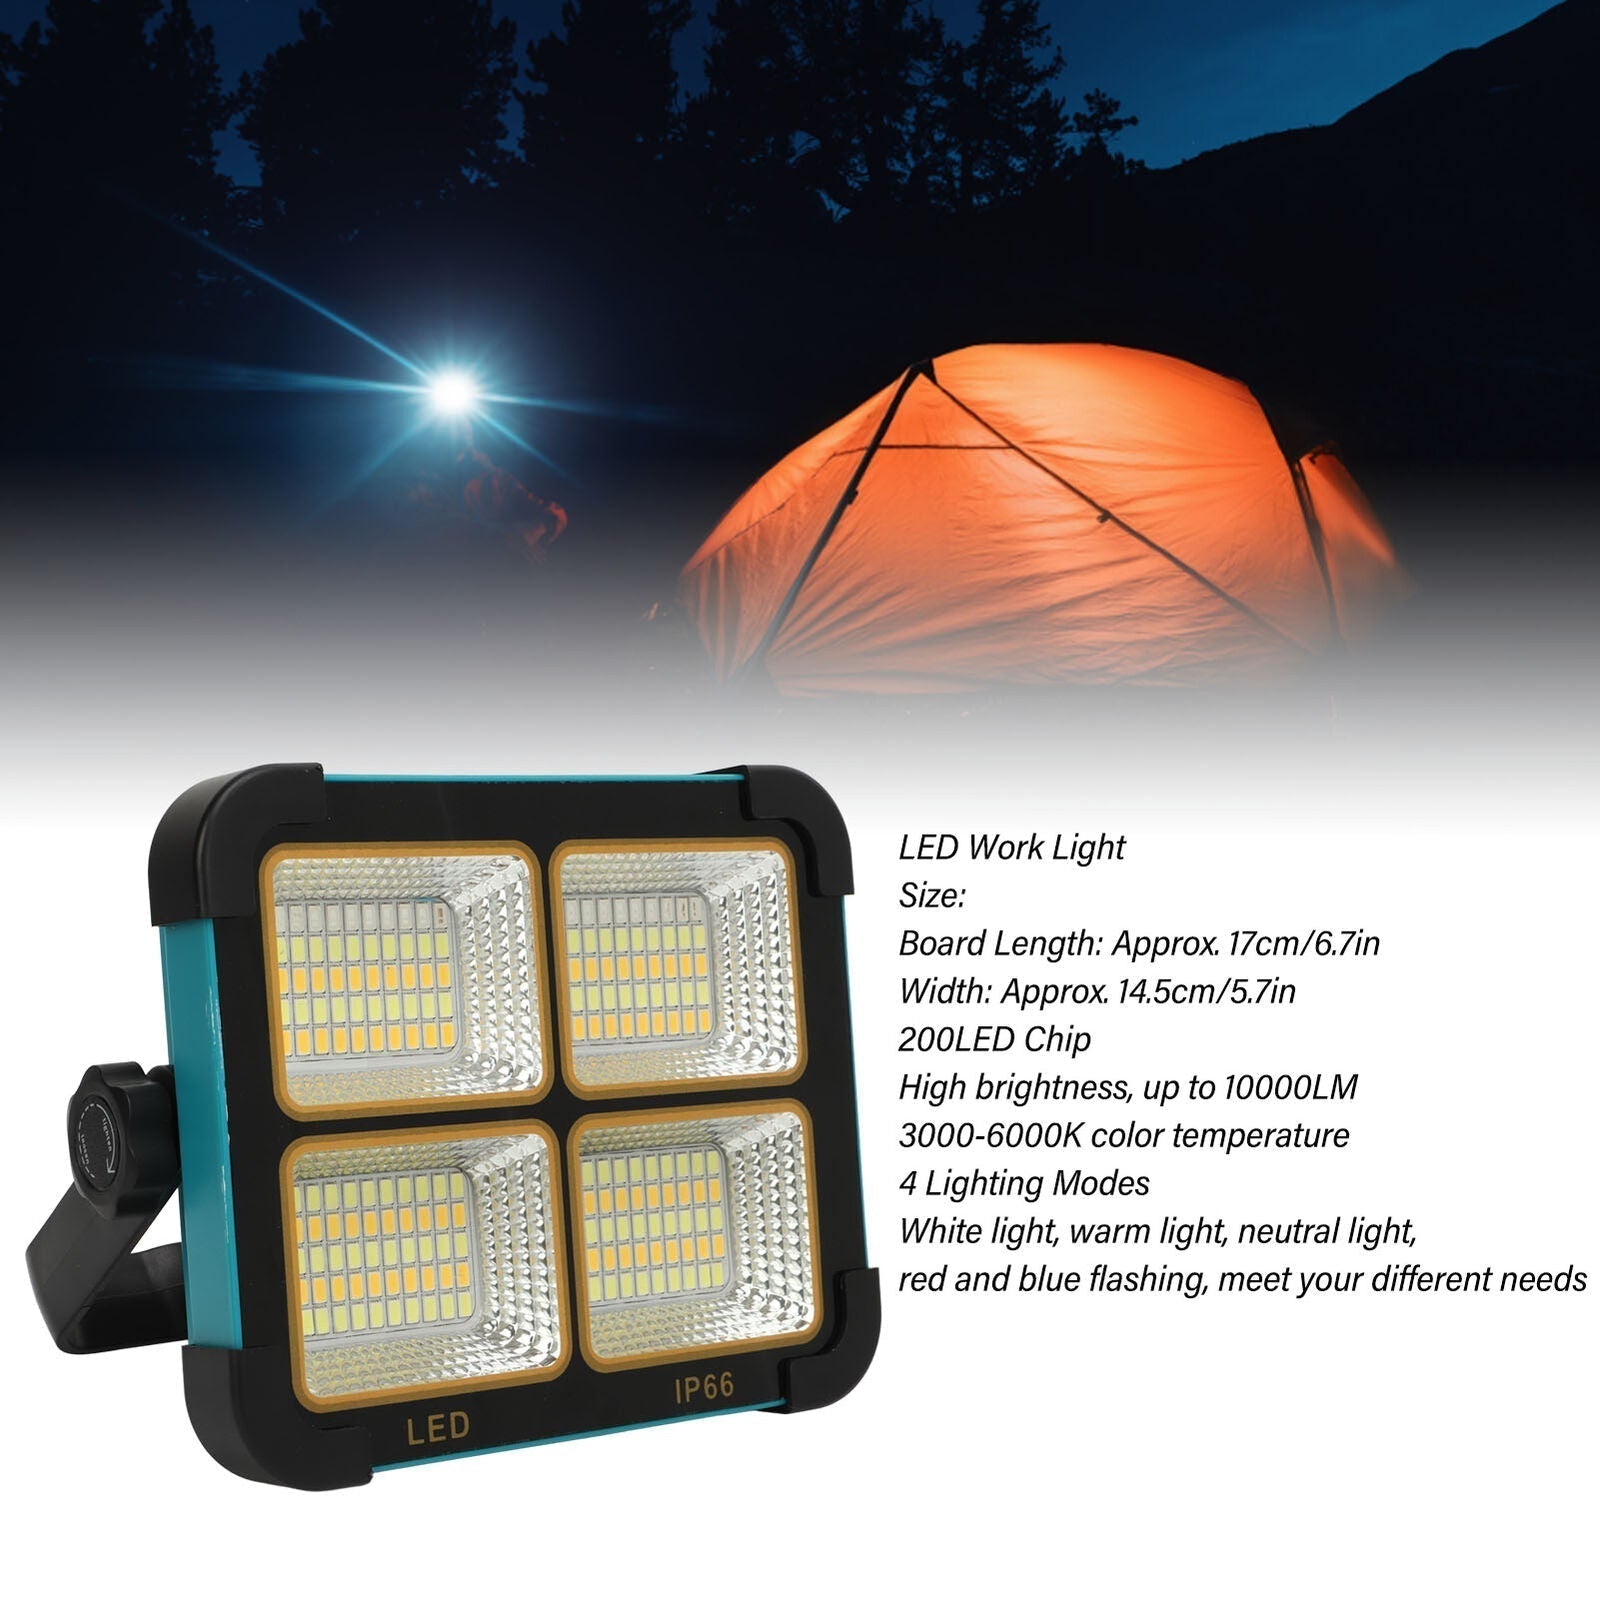 DLC Solar and Rechargeable Outdoor Camping Light DLC-32812 - Green